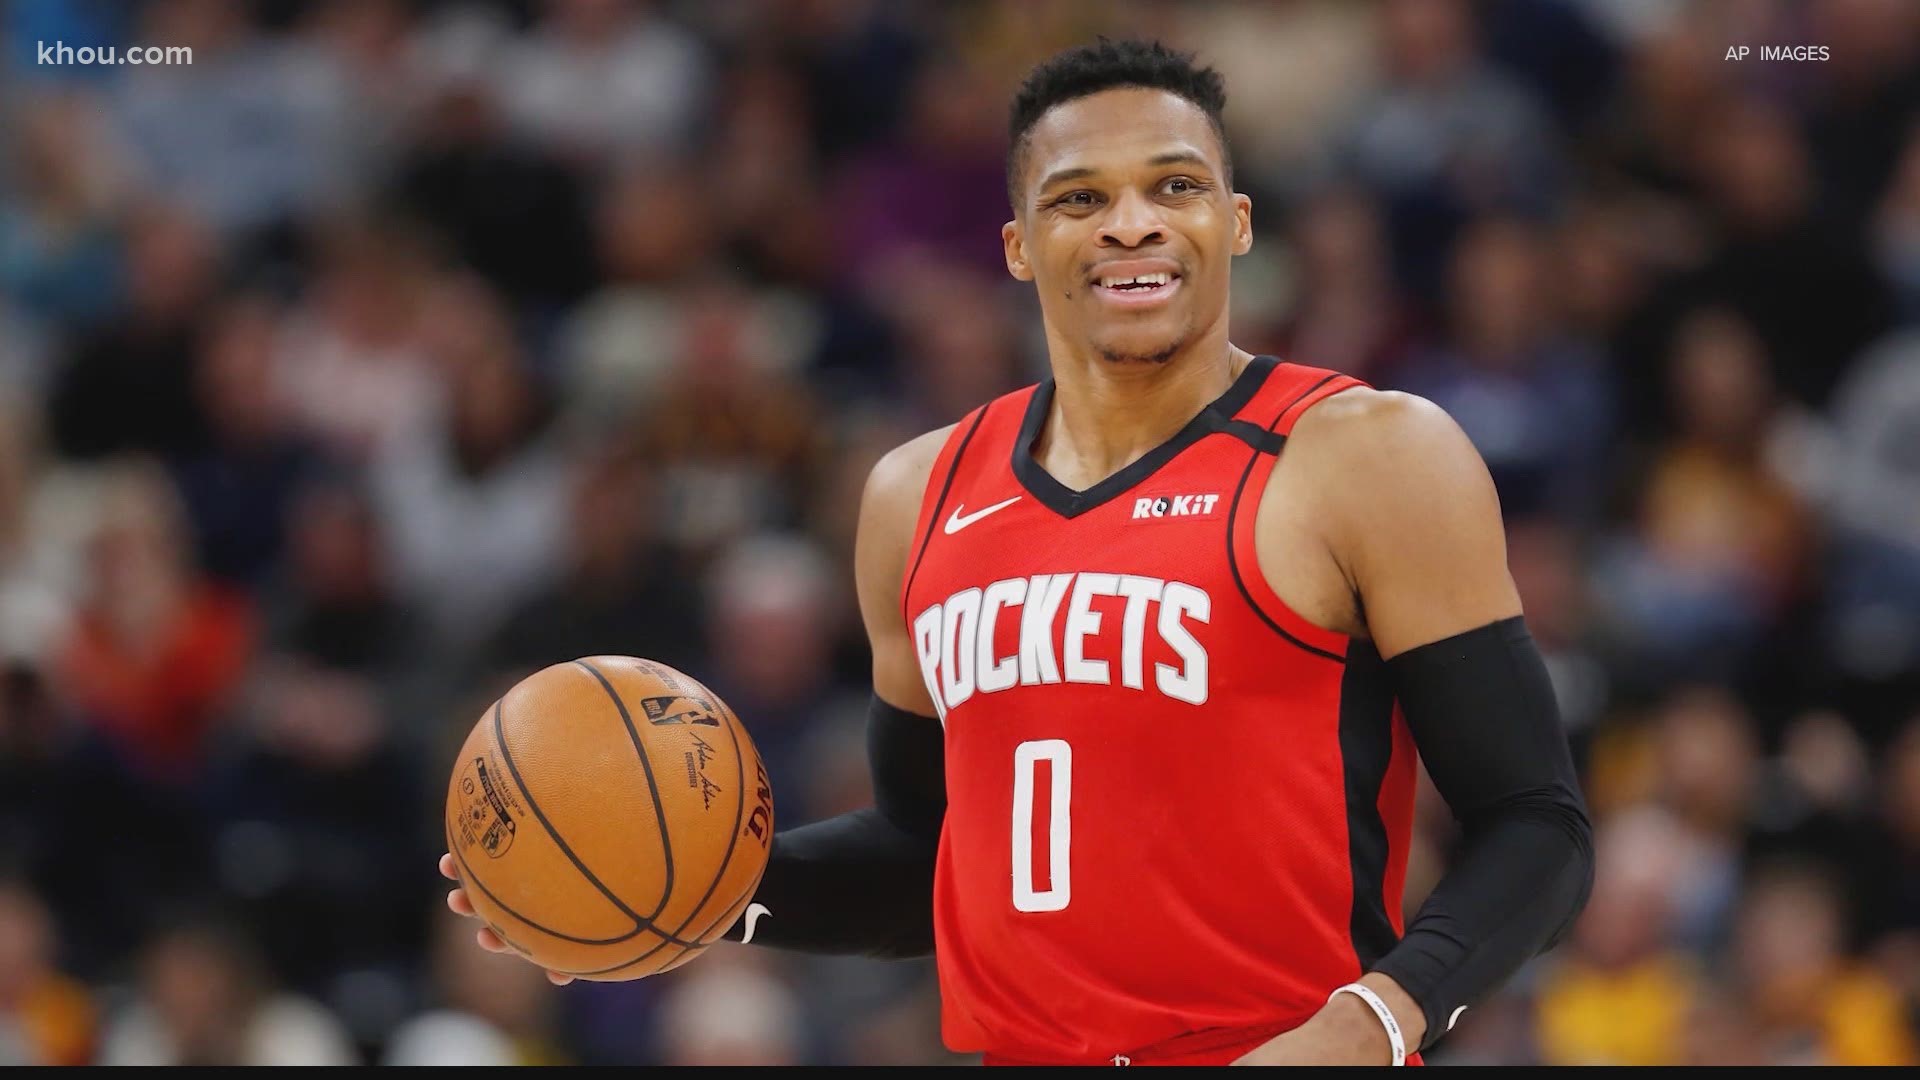 Houston Rockets player Russell Westbrook tests positive for coronavirus before going to NBA Bubble in Orlando.